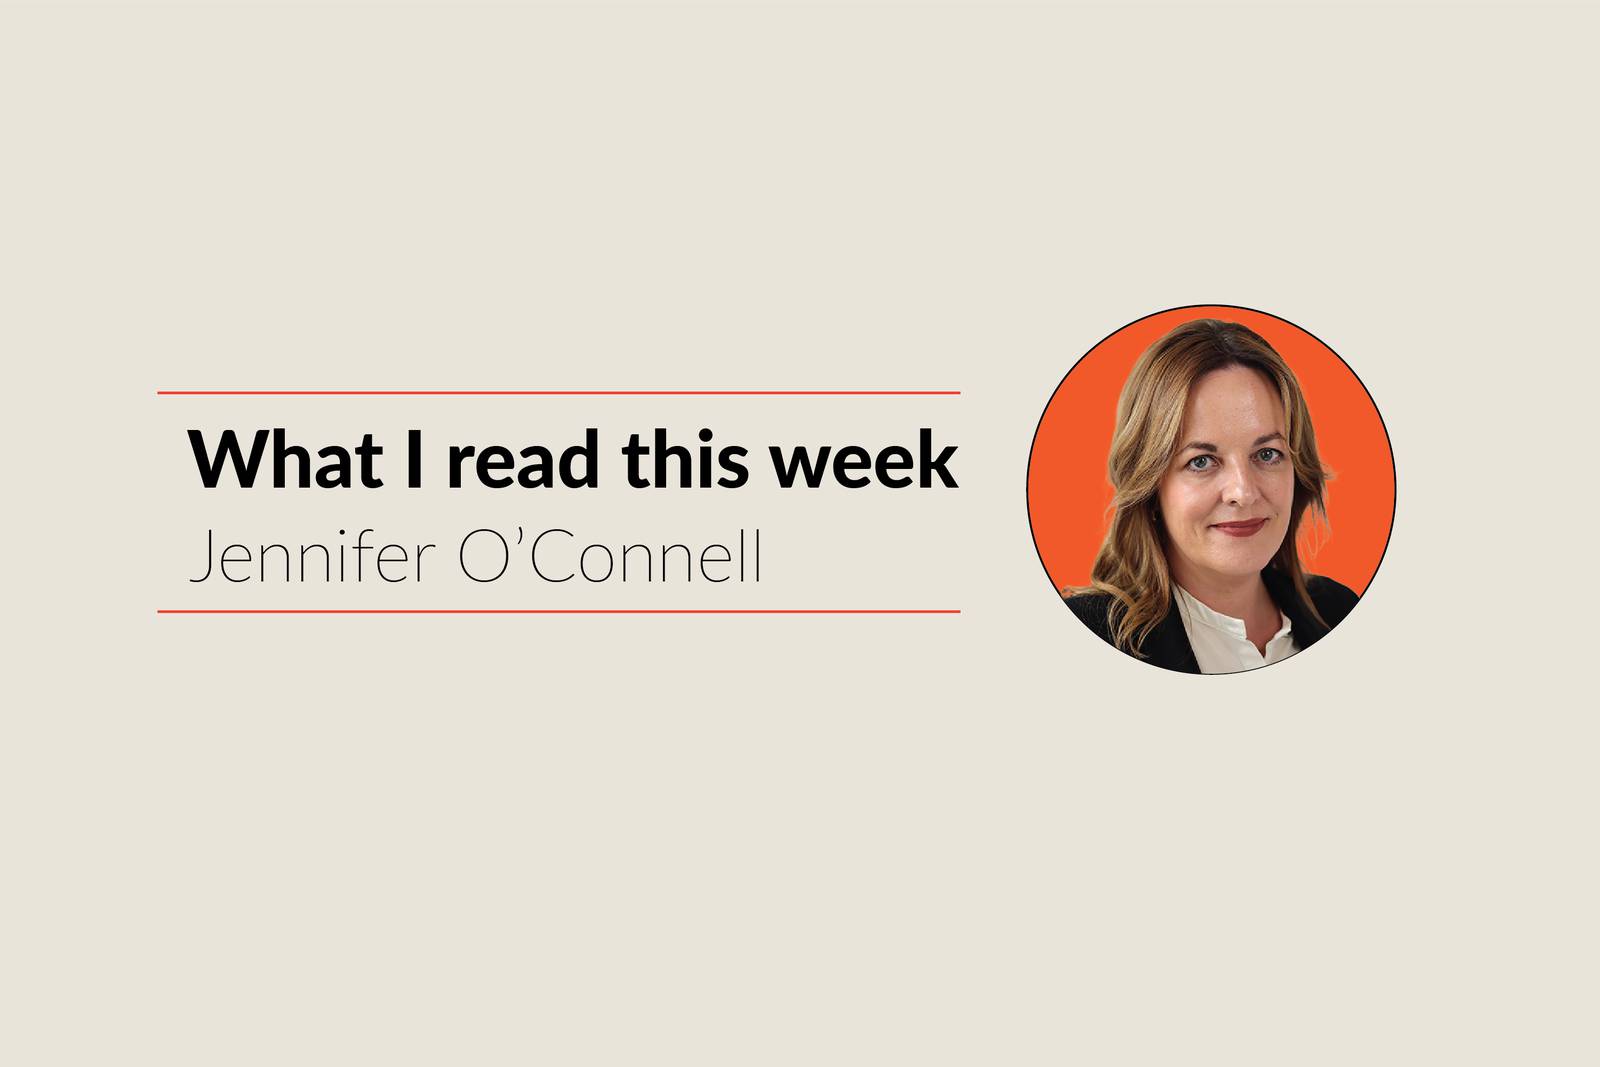 What I read this week Jennifer O'Connell